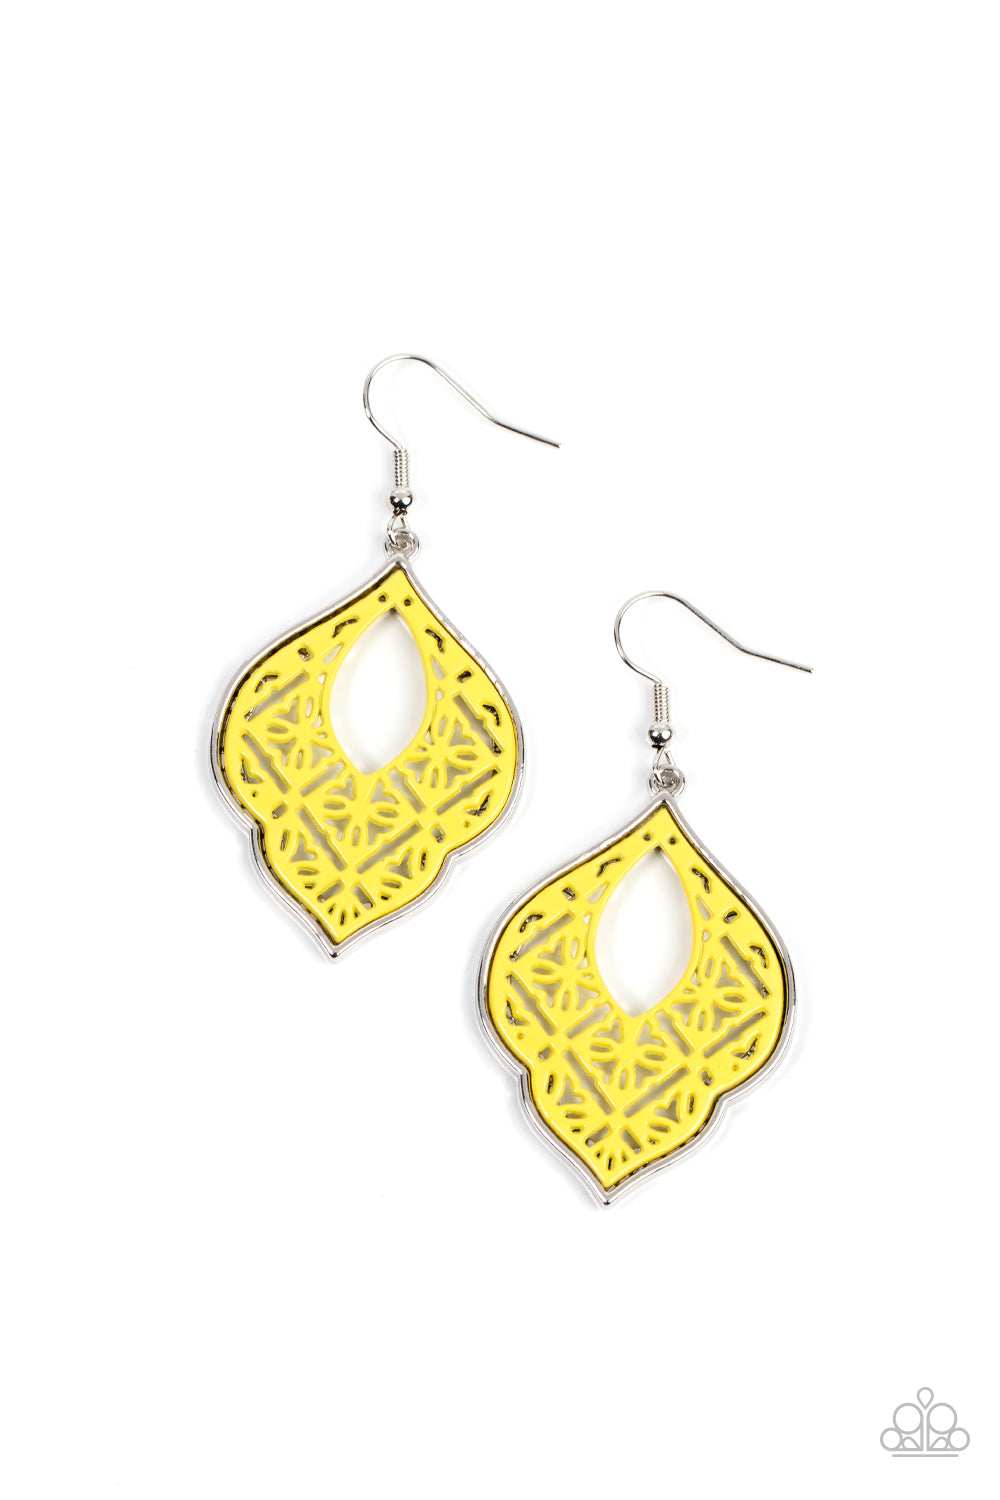 five-dollar-jewelry-thessaly-terrace-yellow-earrings-paparazzi-accessories